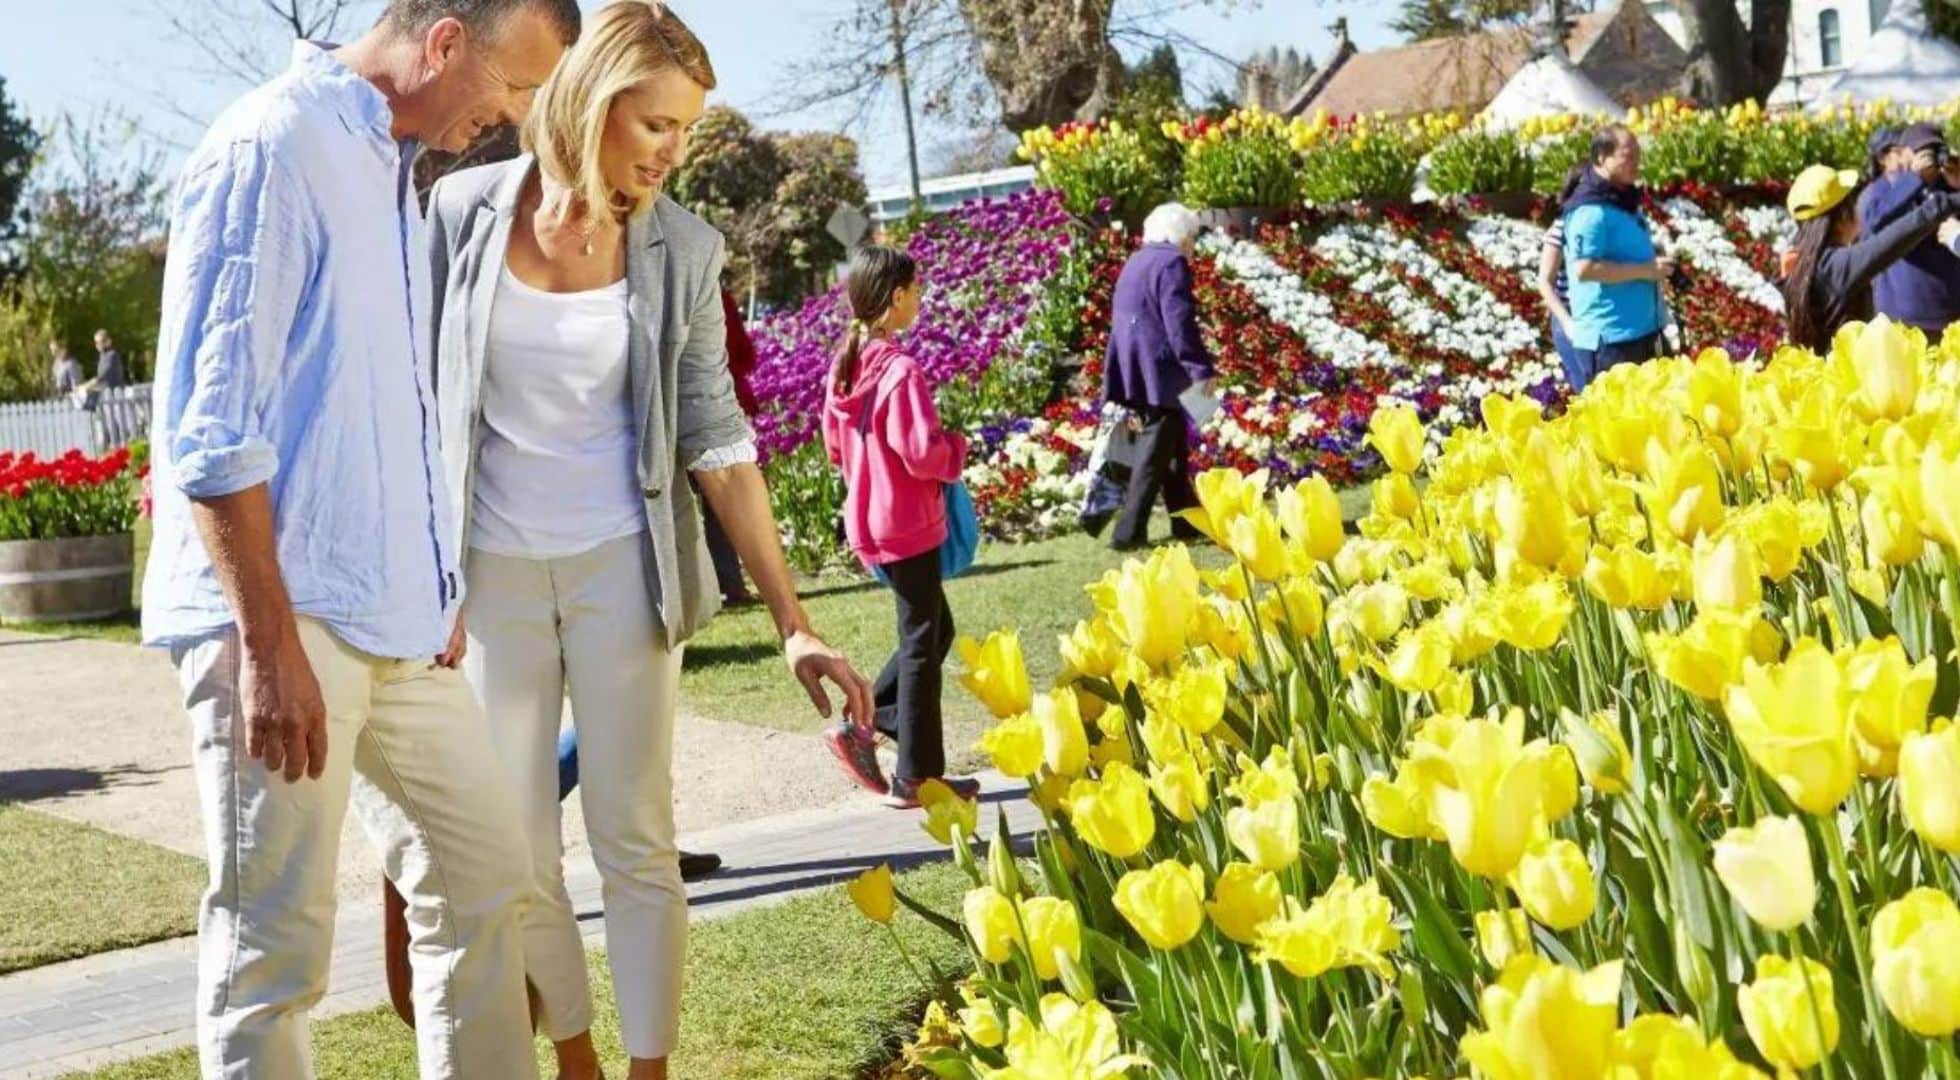 Visit New South Wales for spring blooms